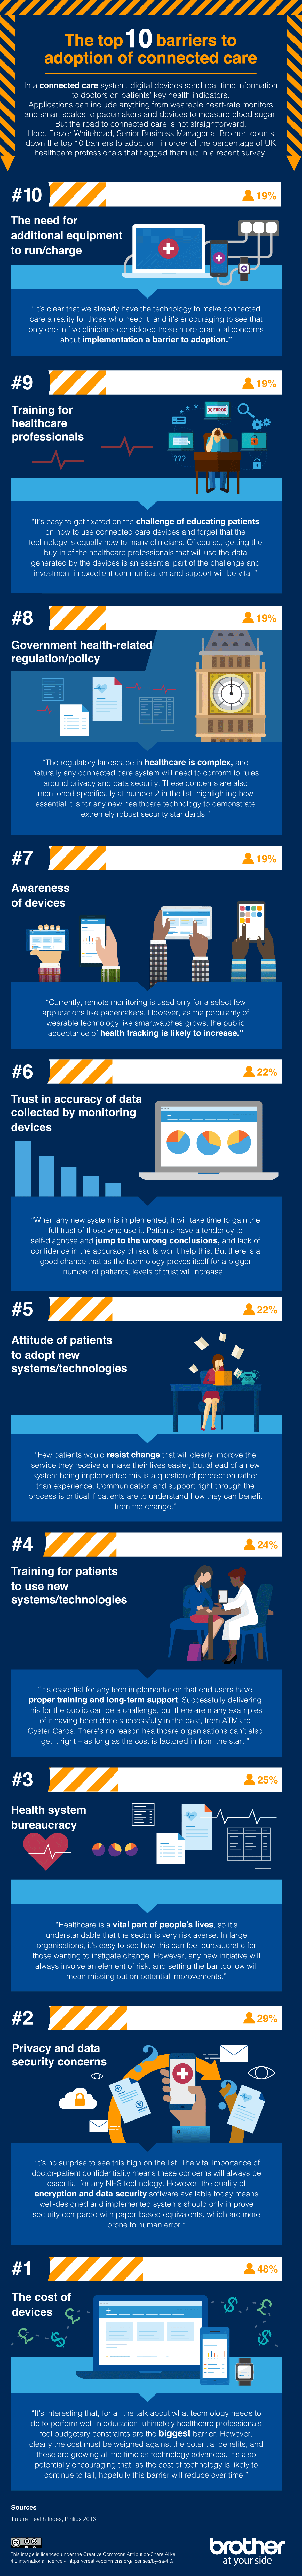 Brother healthcare infographic showing the technology barriers affecting connected patient care